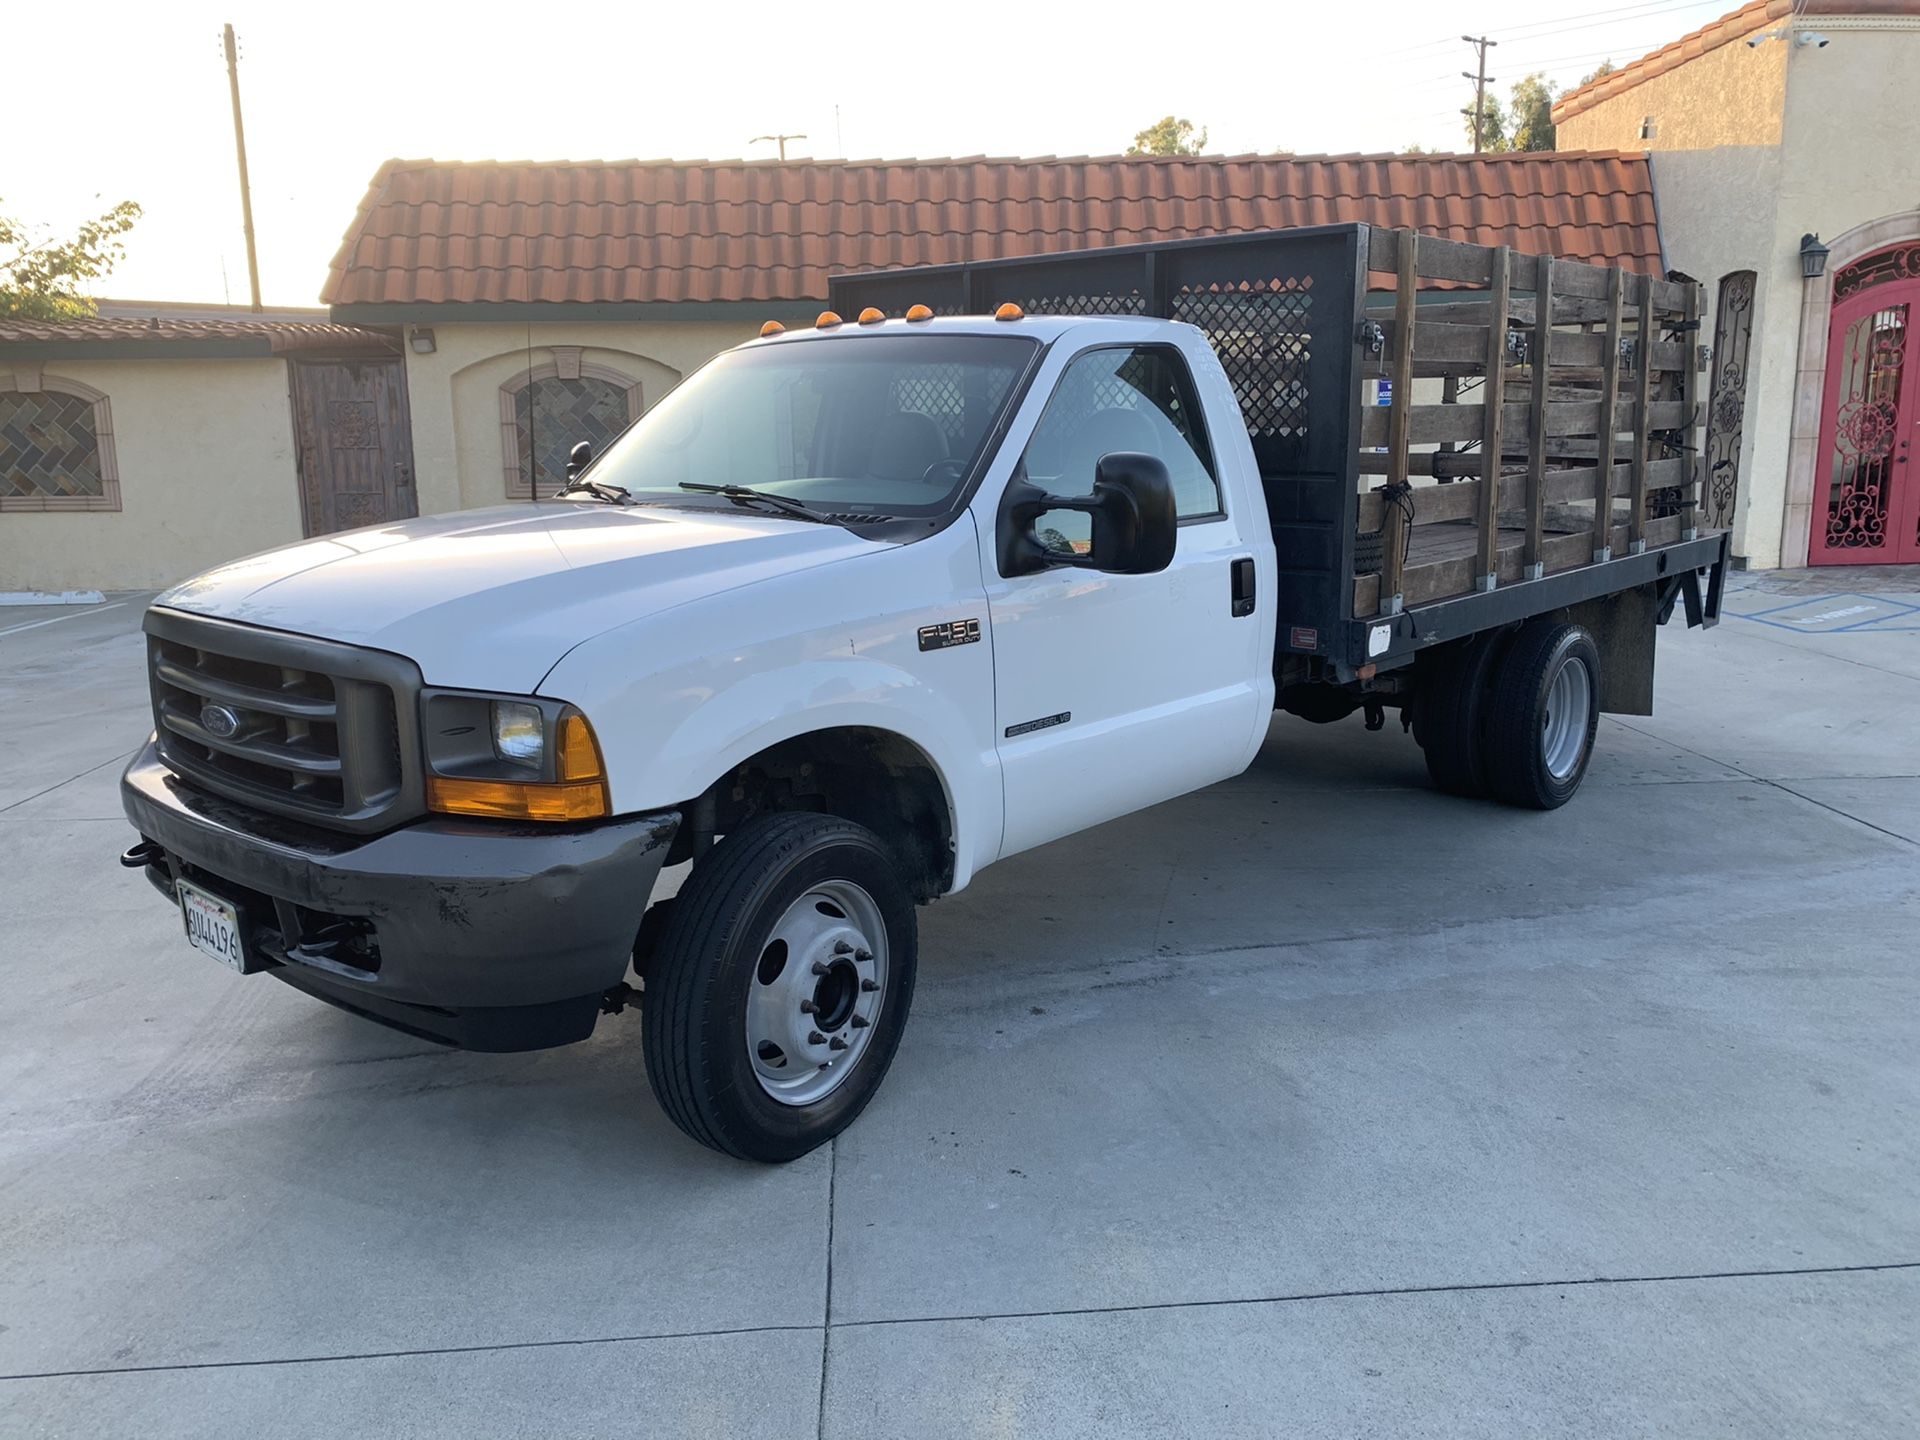 2001 Ford F450 7.3 diesel 12 foot flatbed truck with lift gate only 76,000 original miles runs excellent